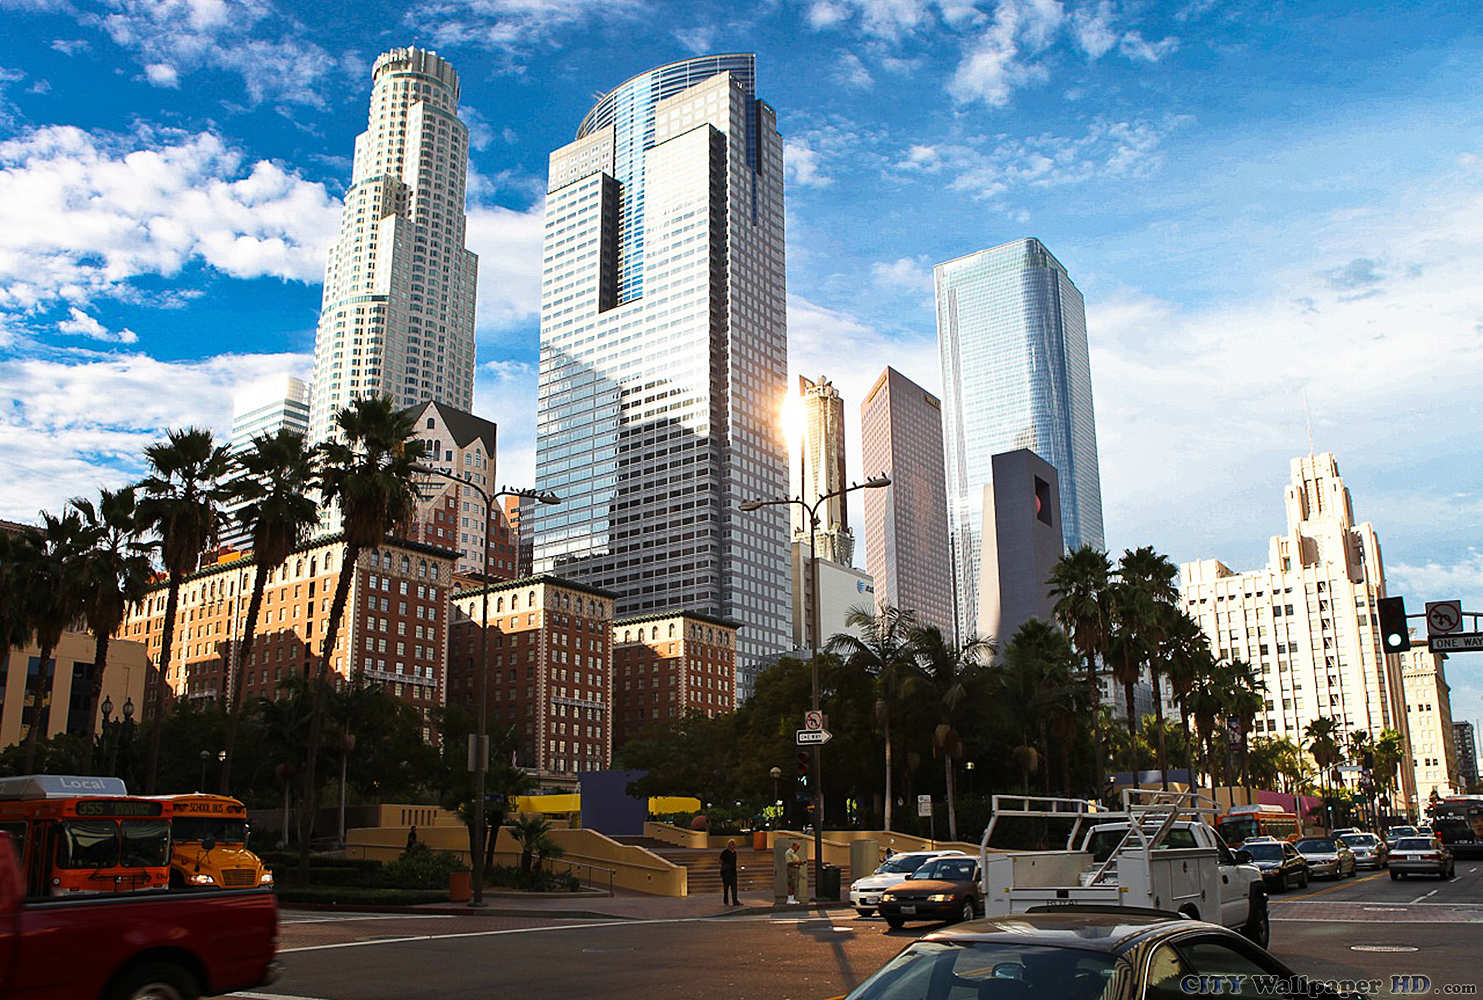 Sunny day in Los Angeles. HD wallpaper cities in the world for your desktop. Los angeles